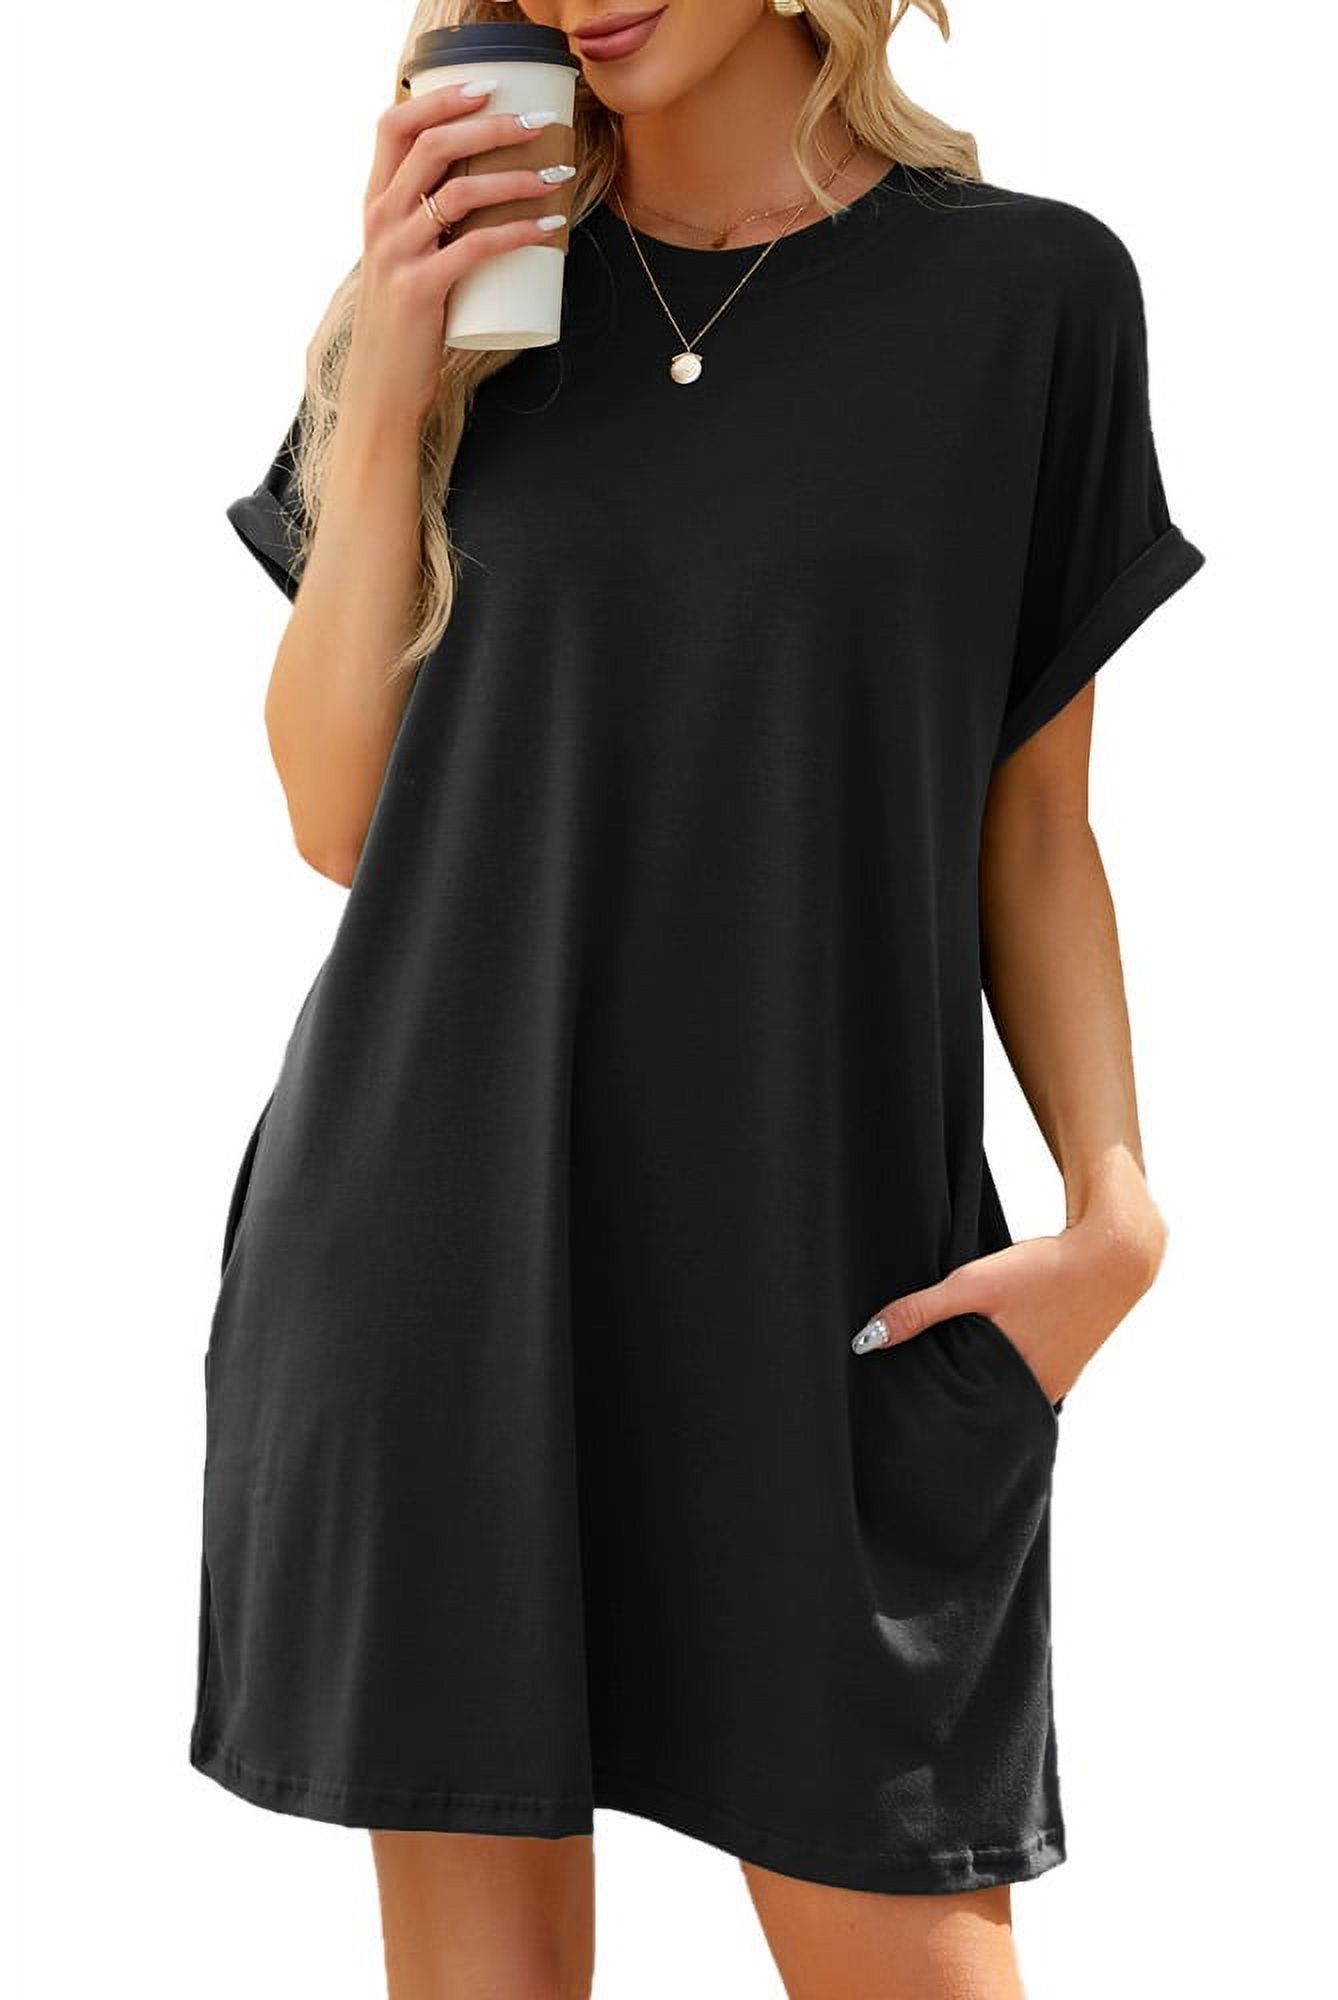 MOA COLLECTION Women's Oversize Solid Casual Comfy Short Sleeve Jersey ...